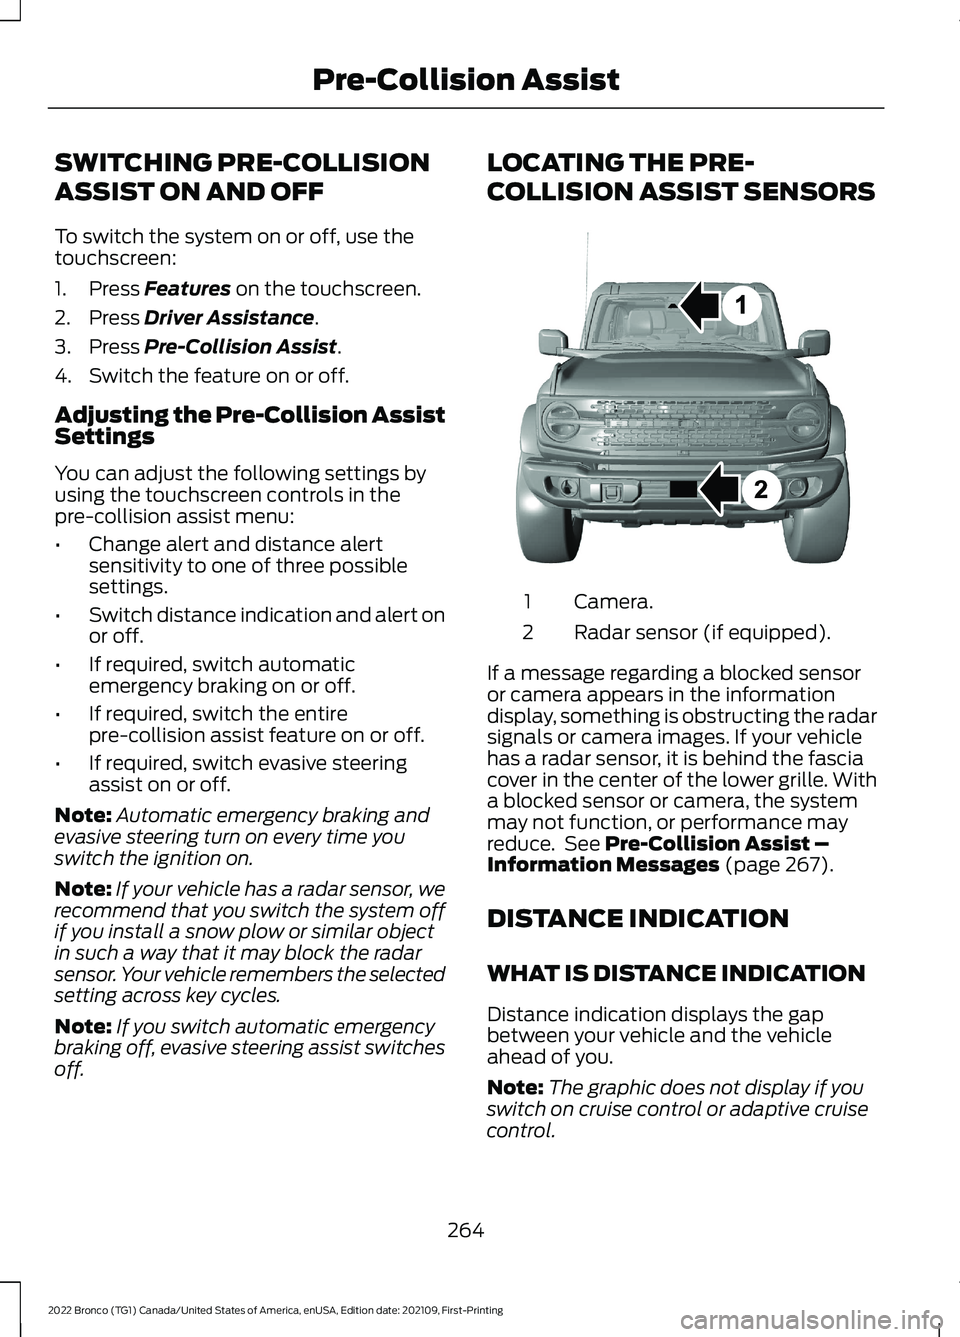 FORD BRONCO 2022 Owners Manual SWITCHING PRE-COLLISION
ASSIST ON AND OFF
To switch the system on or off, use thetouchscreen:
1.Press Features on the touchscreen.
2.Press Driver Assistance.
3.Press Pre-Collision Assist.
4.Switch the